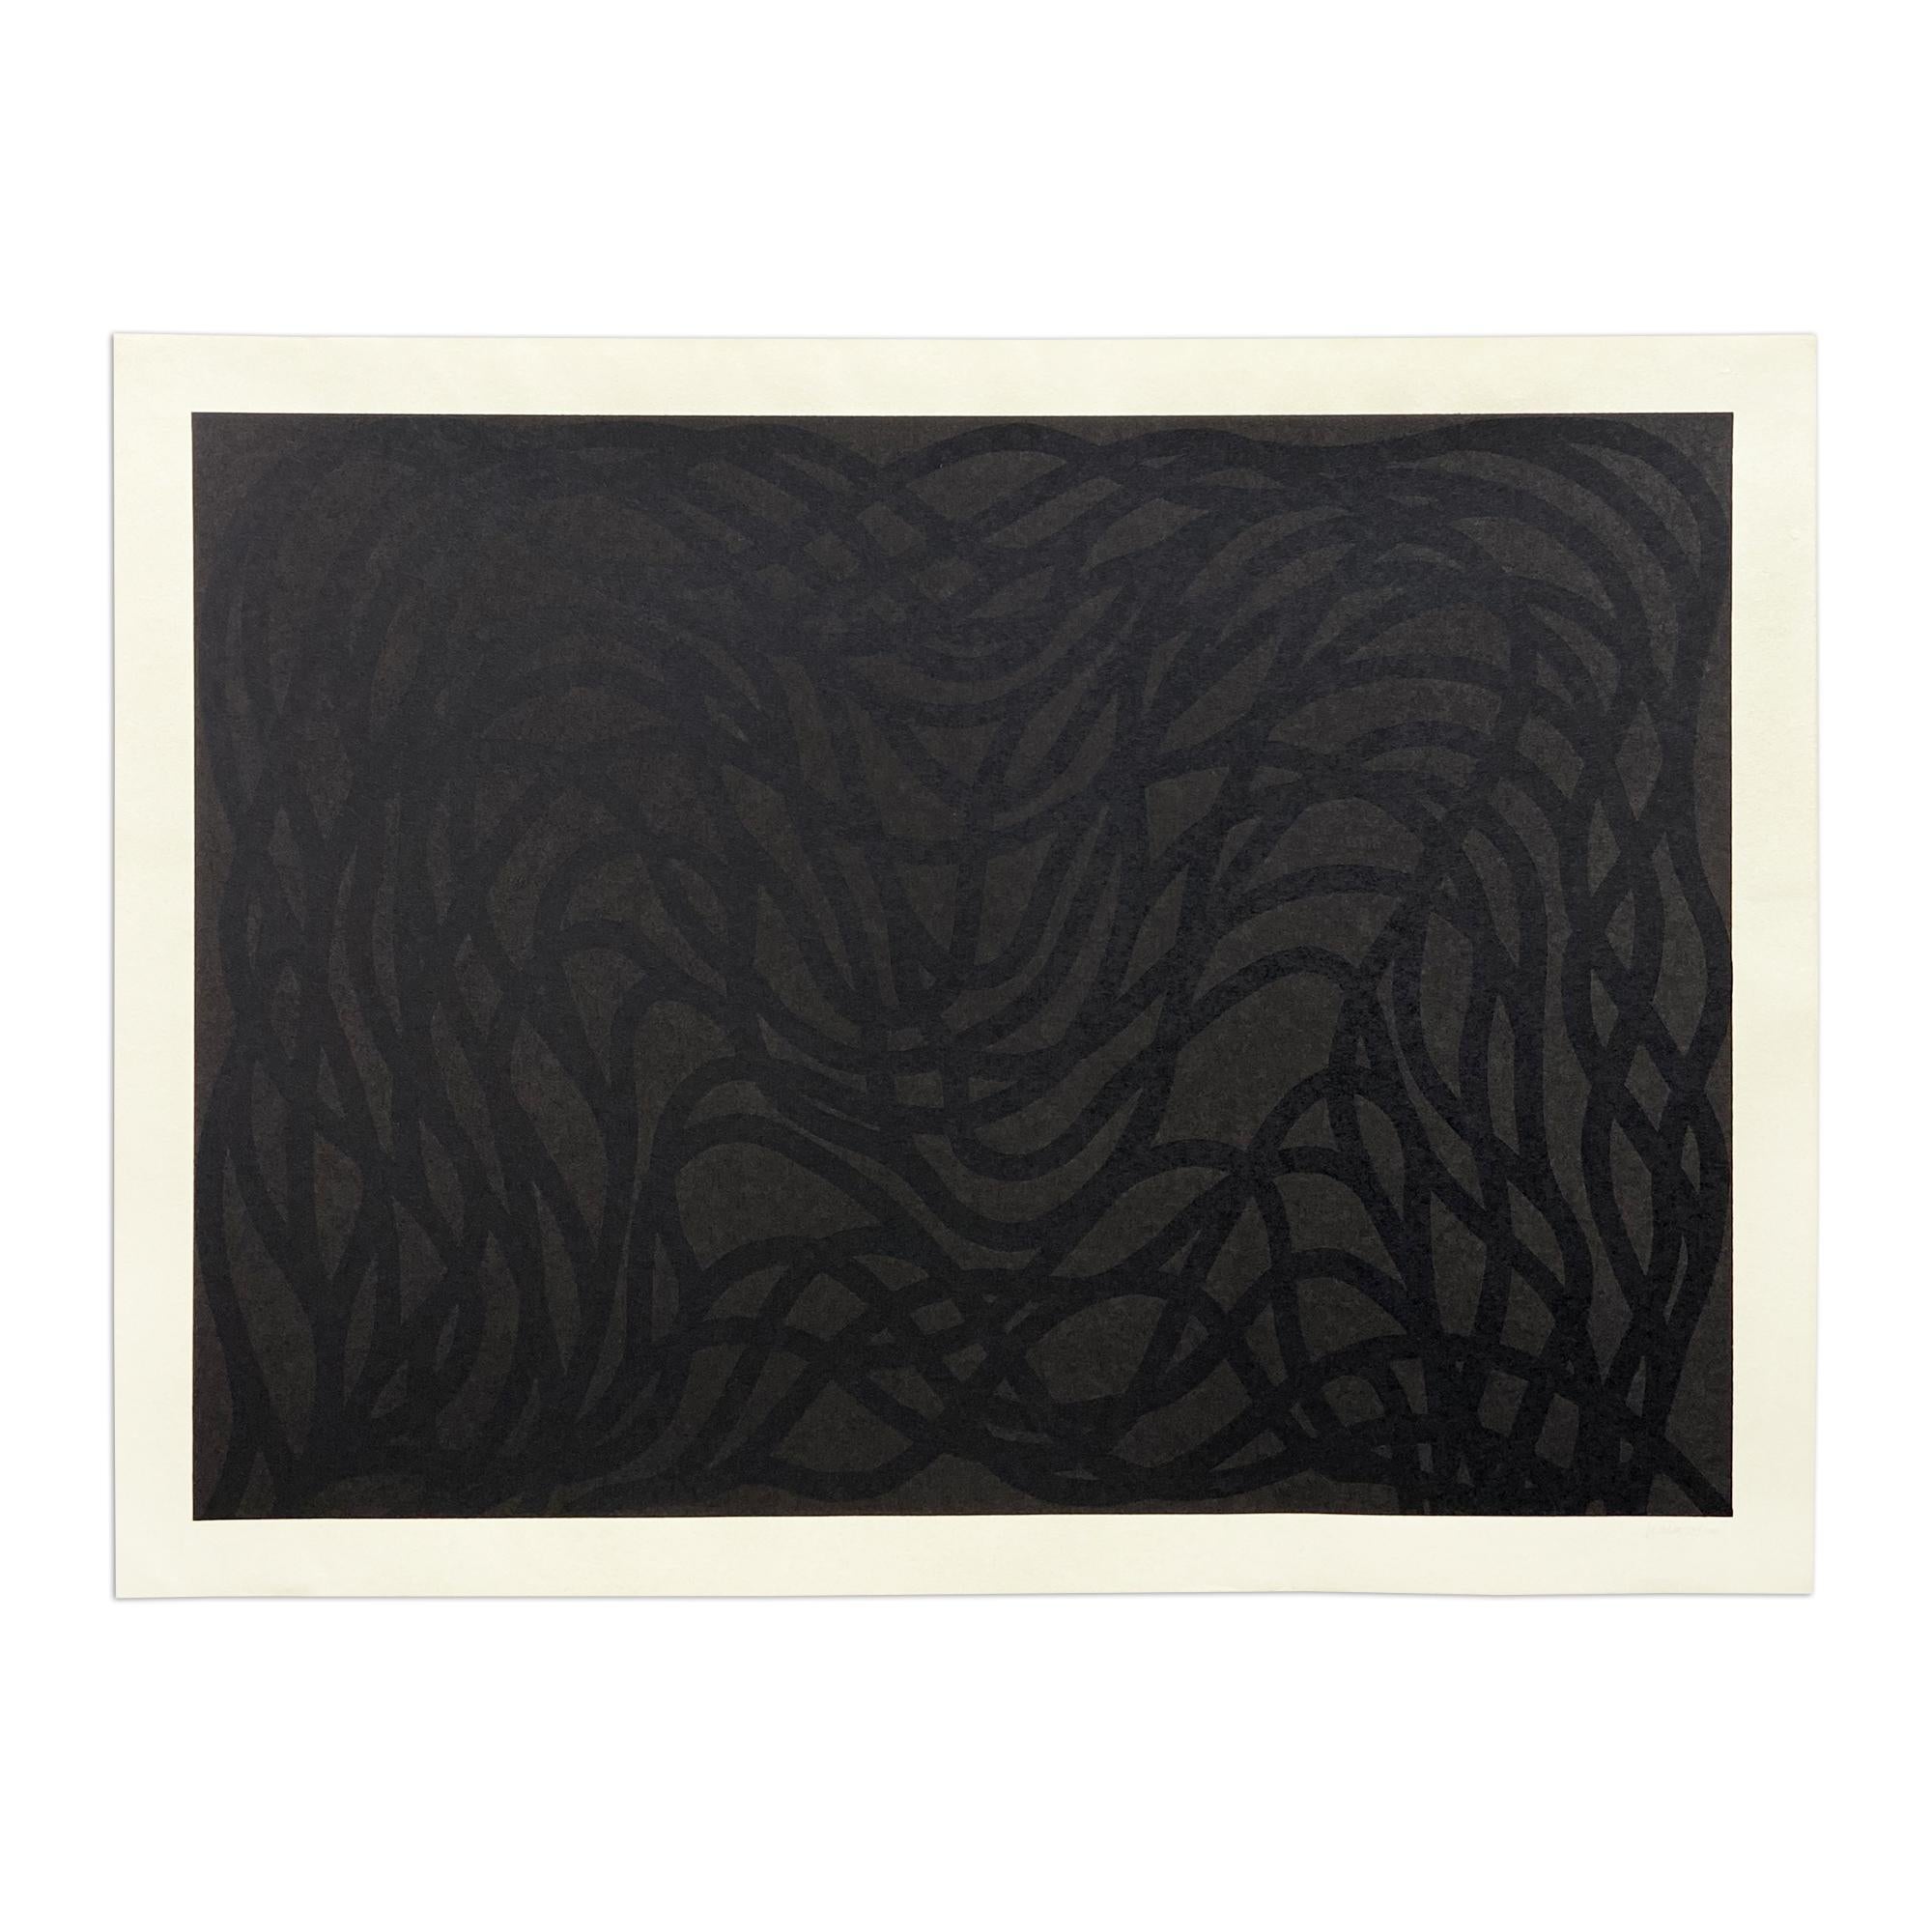 Sol LeWitt, Loopy Doopy (Black/Gray) - Woodcut, 2000, Abstract Art, Signed Print